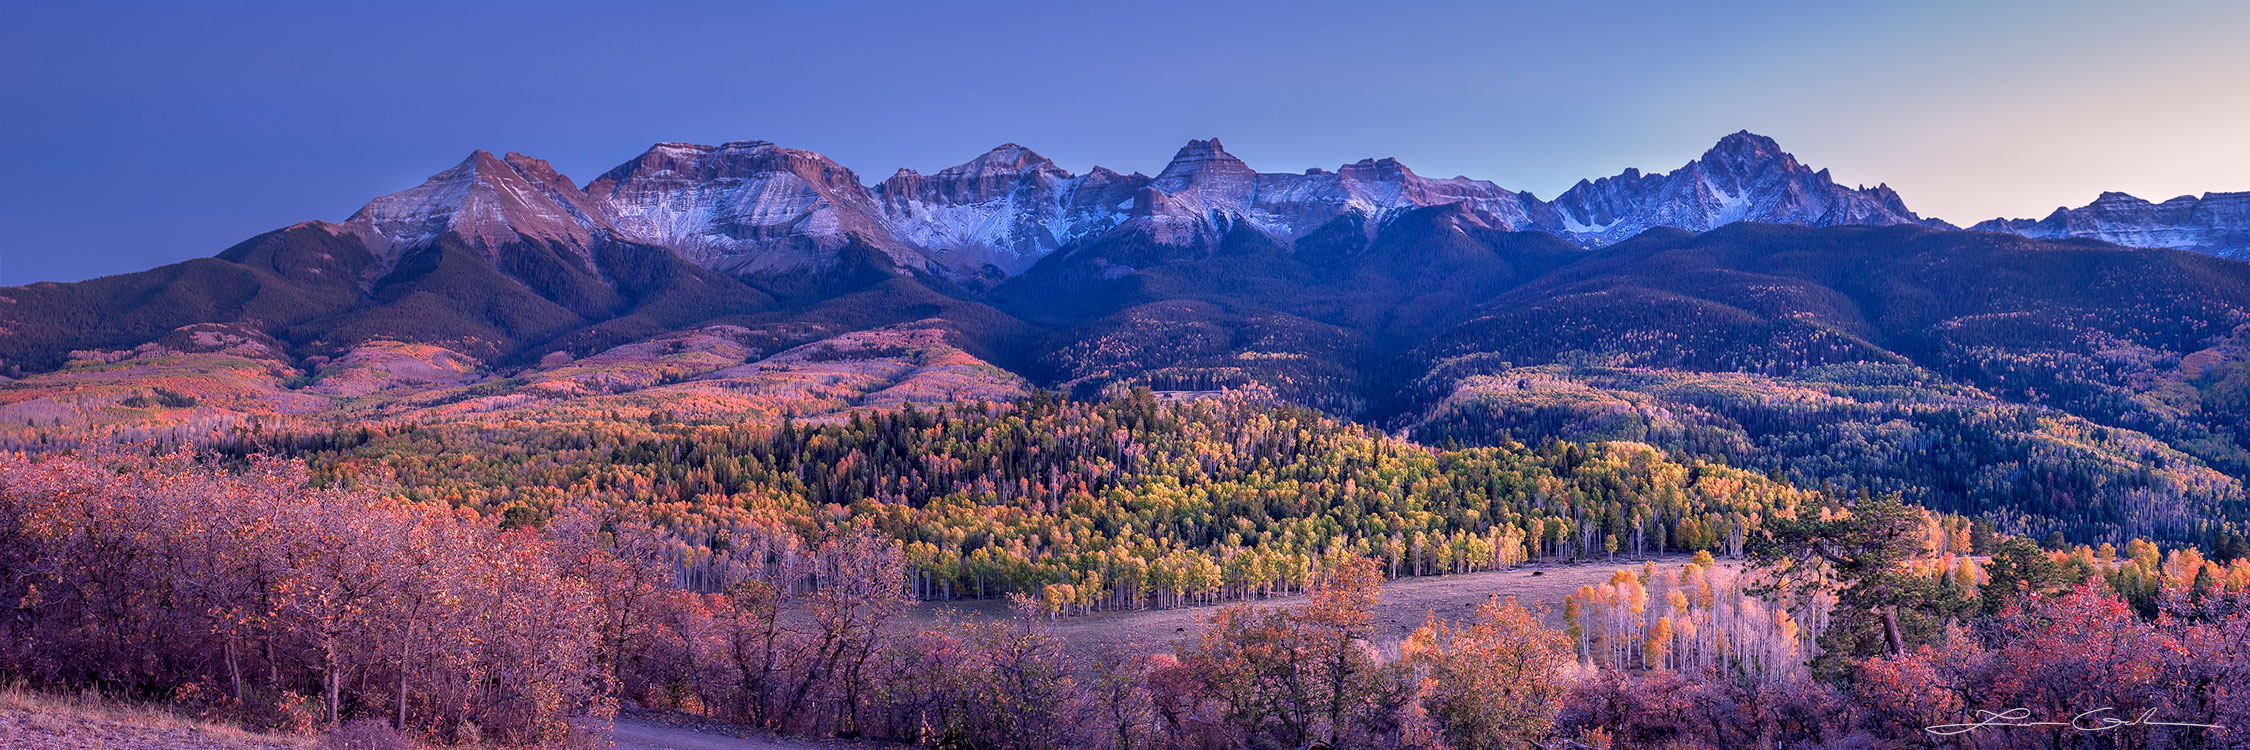 A panorama of a snowy and jagged mountain range with fall color aspen trees